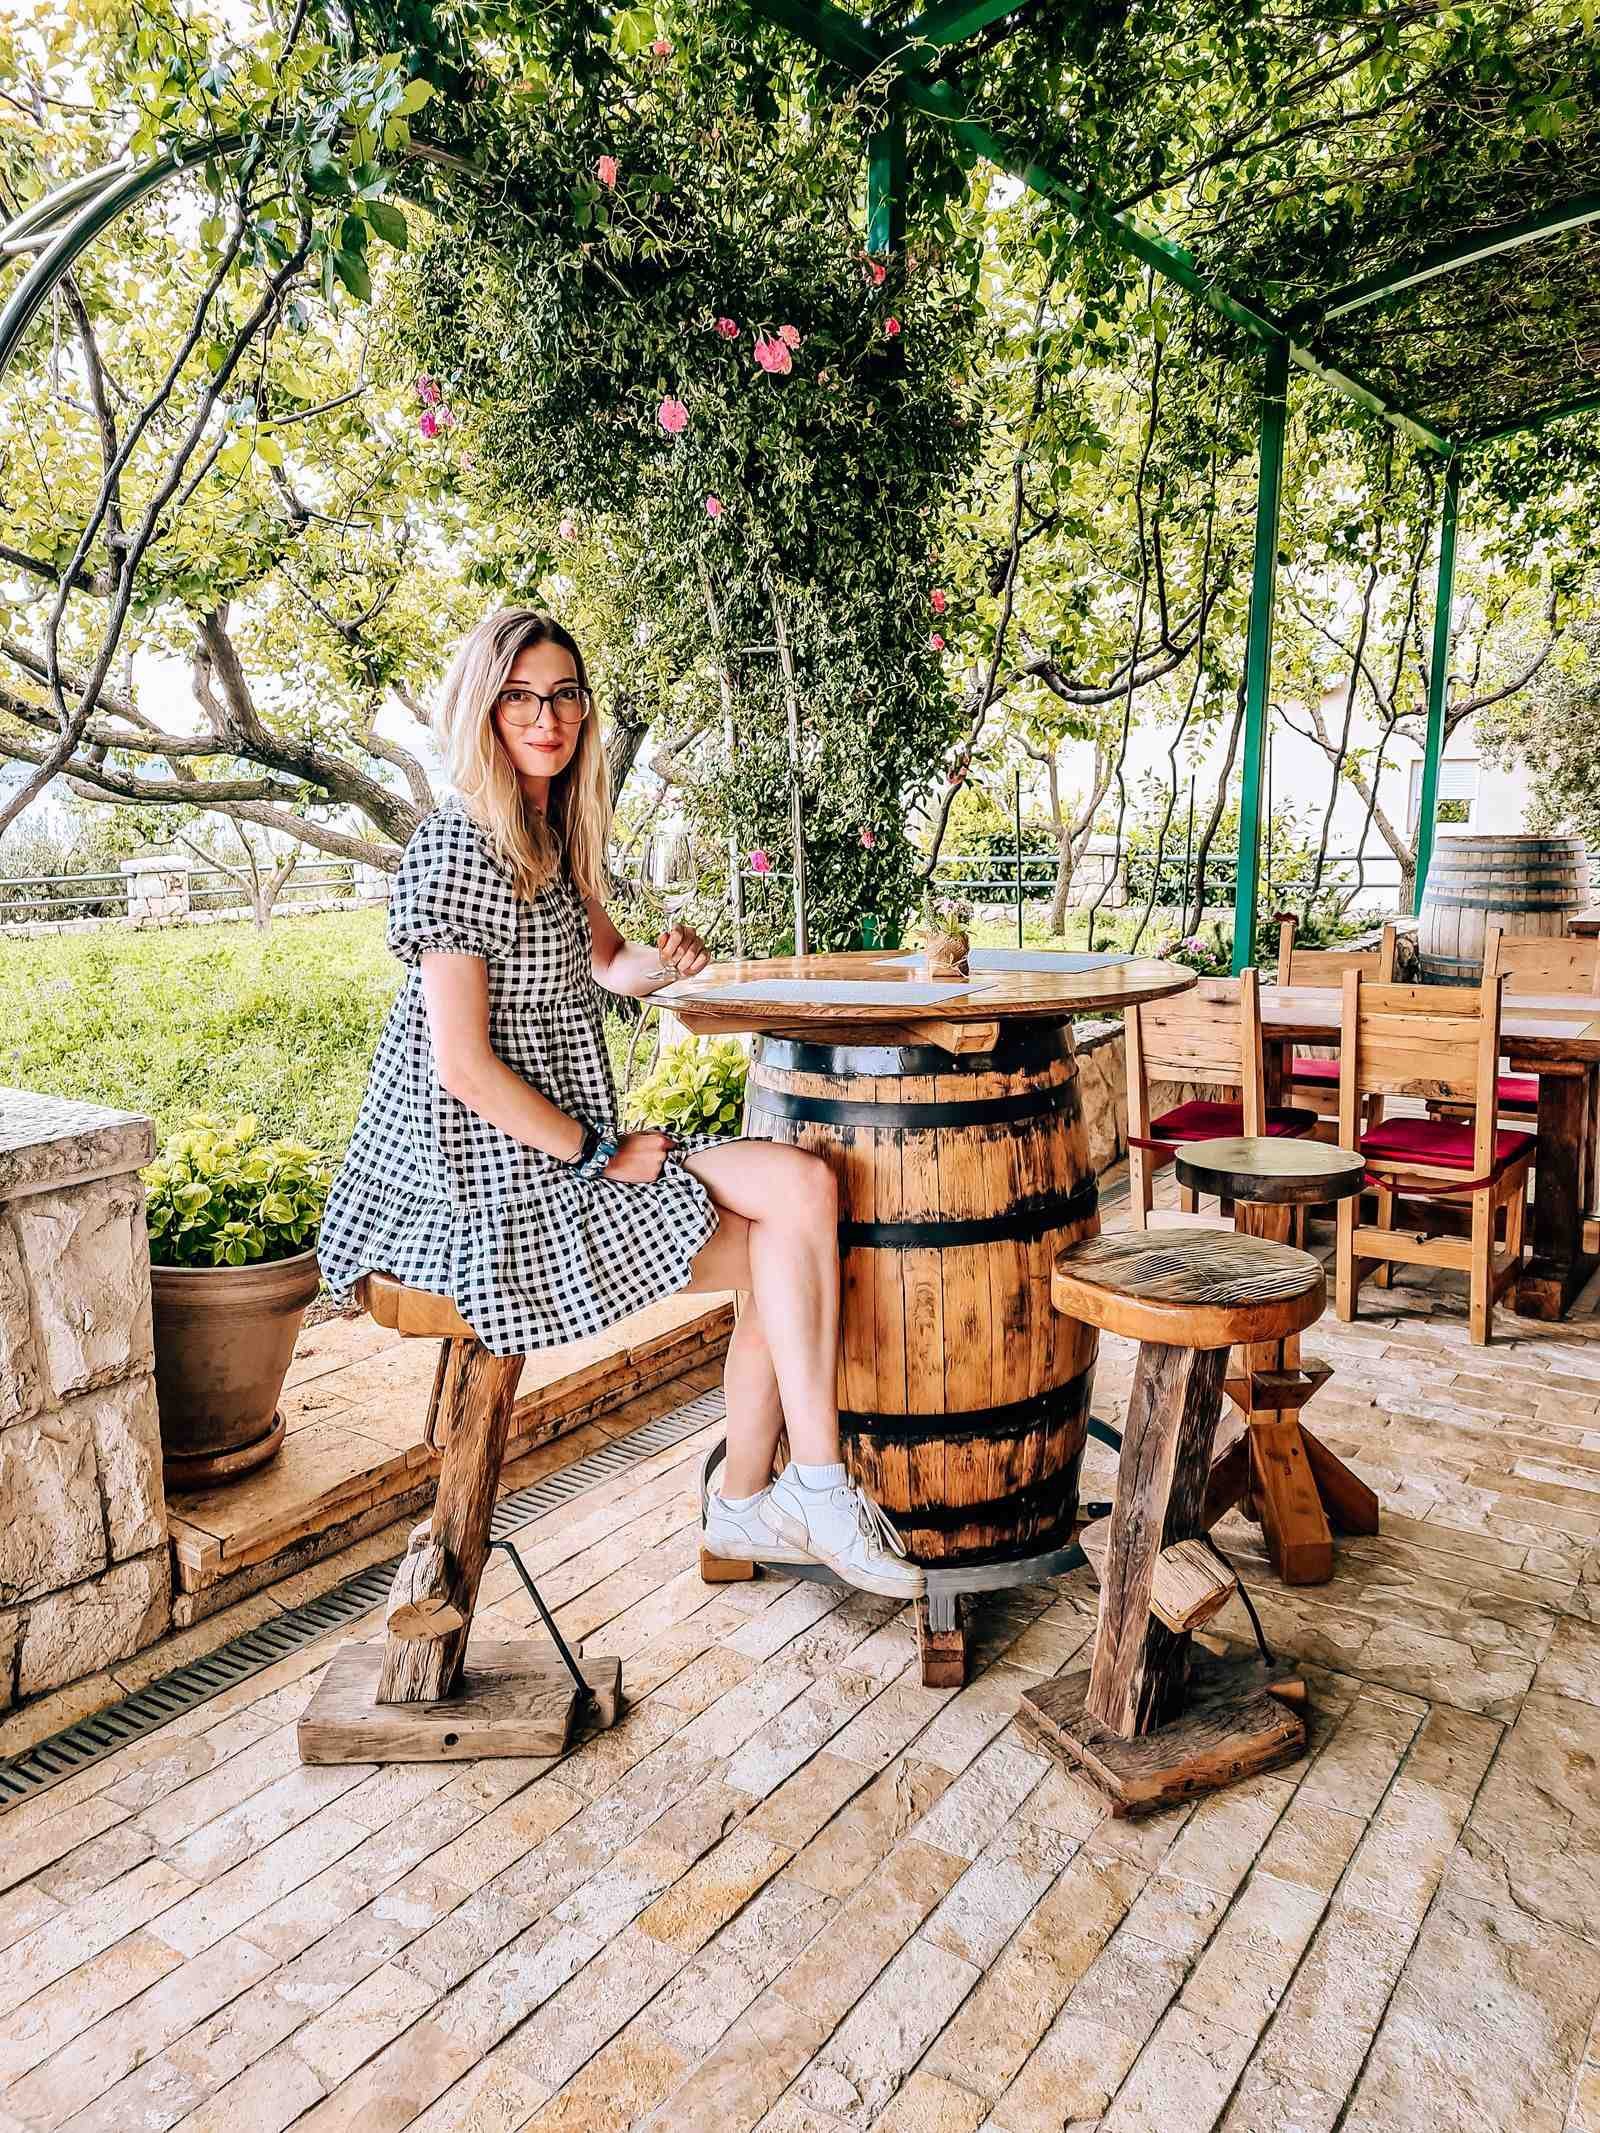 A girl in a black and white dress sitting on a wooden stool leaning against an wooden barrel table underneath many green vines shading the area